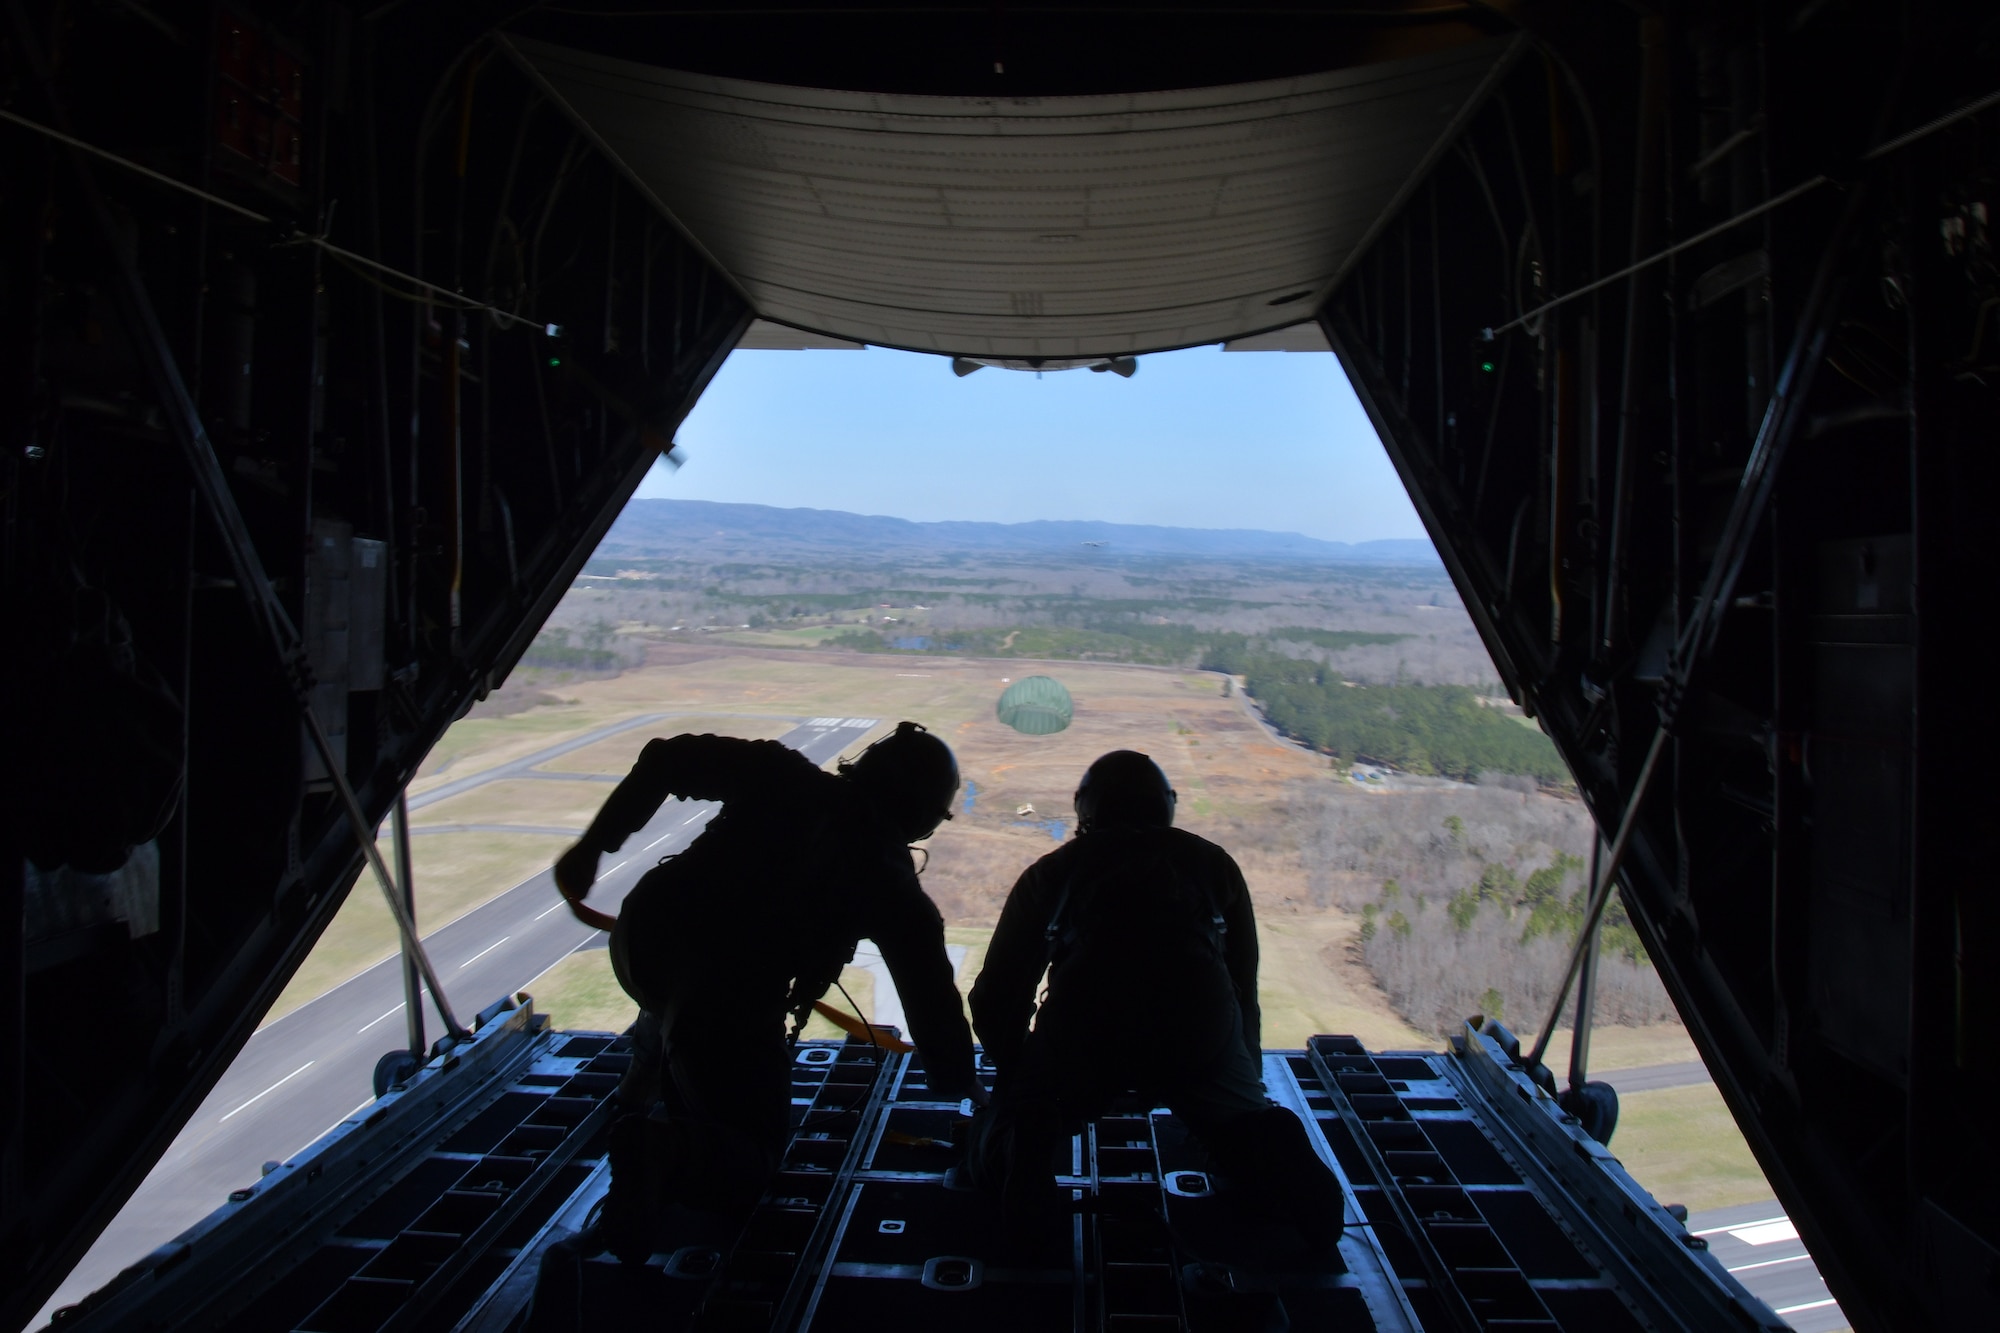 Master Sgts. Andrew S. Cline and Antwun T. Cotton, both 94th Operations Support Squadron loadmasters, release a Low-Cost-Low-Altitude airdrop over Rome, Ga. March 4, 2021. Multiple C-130s flew together as part of Baltic Wolf 2021, a large formation exercise incorporating other units within the Air Force Reserve Command. (U.S. Air Force photo by Senior Airman Kendra A. Ransum)